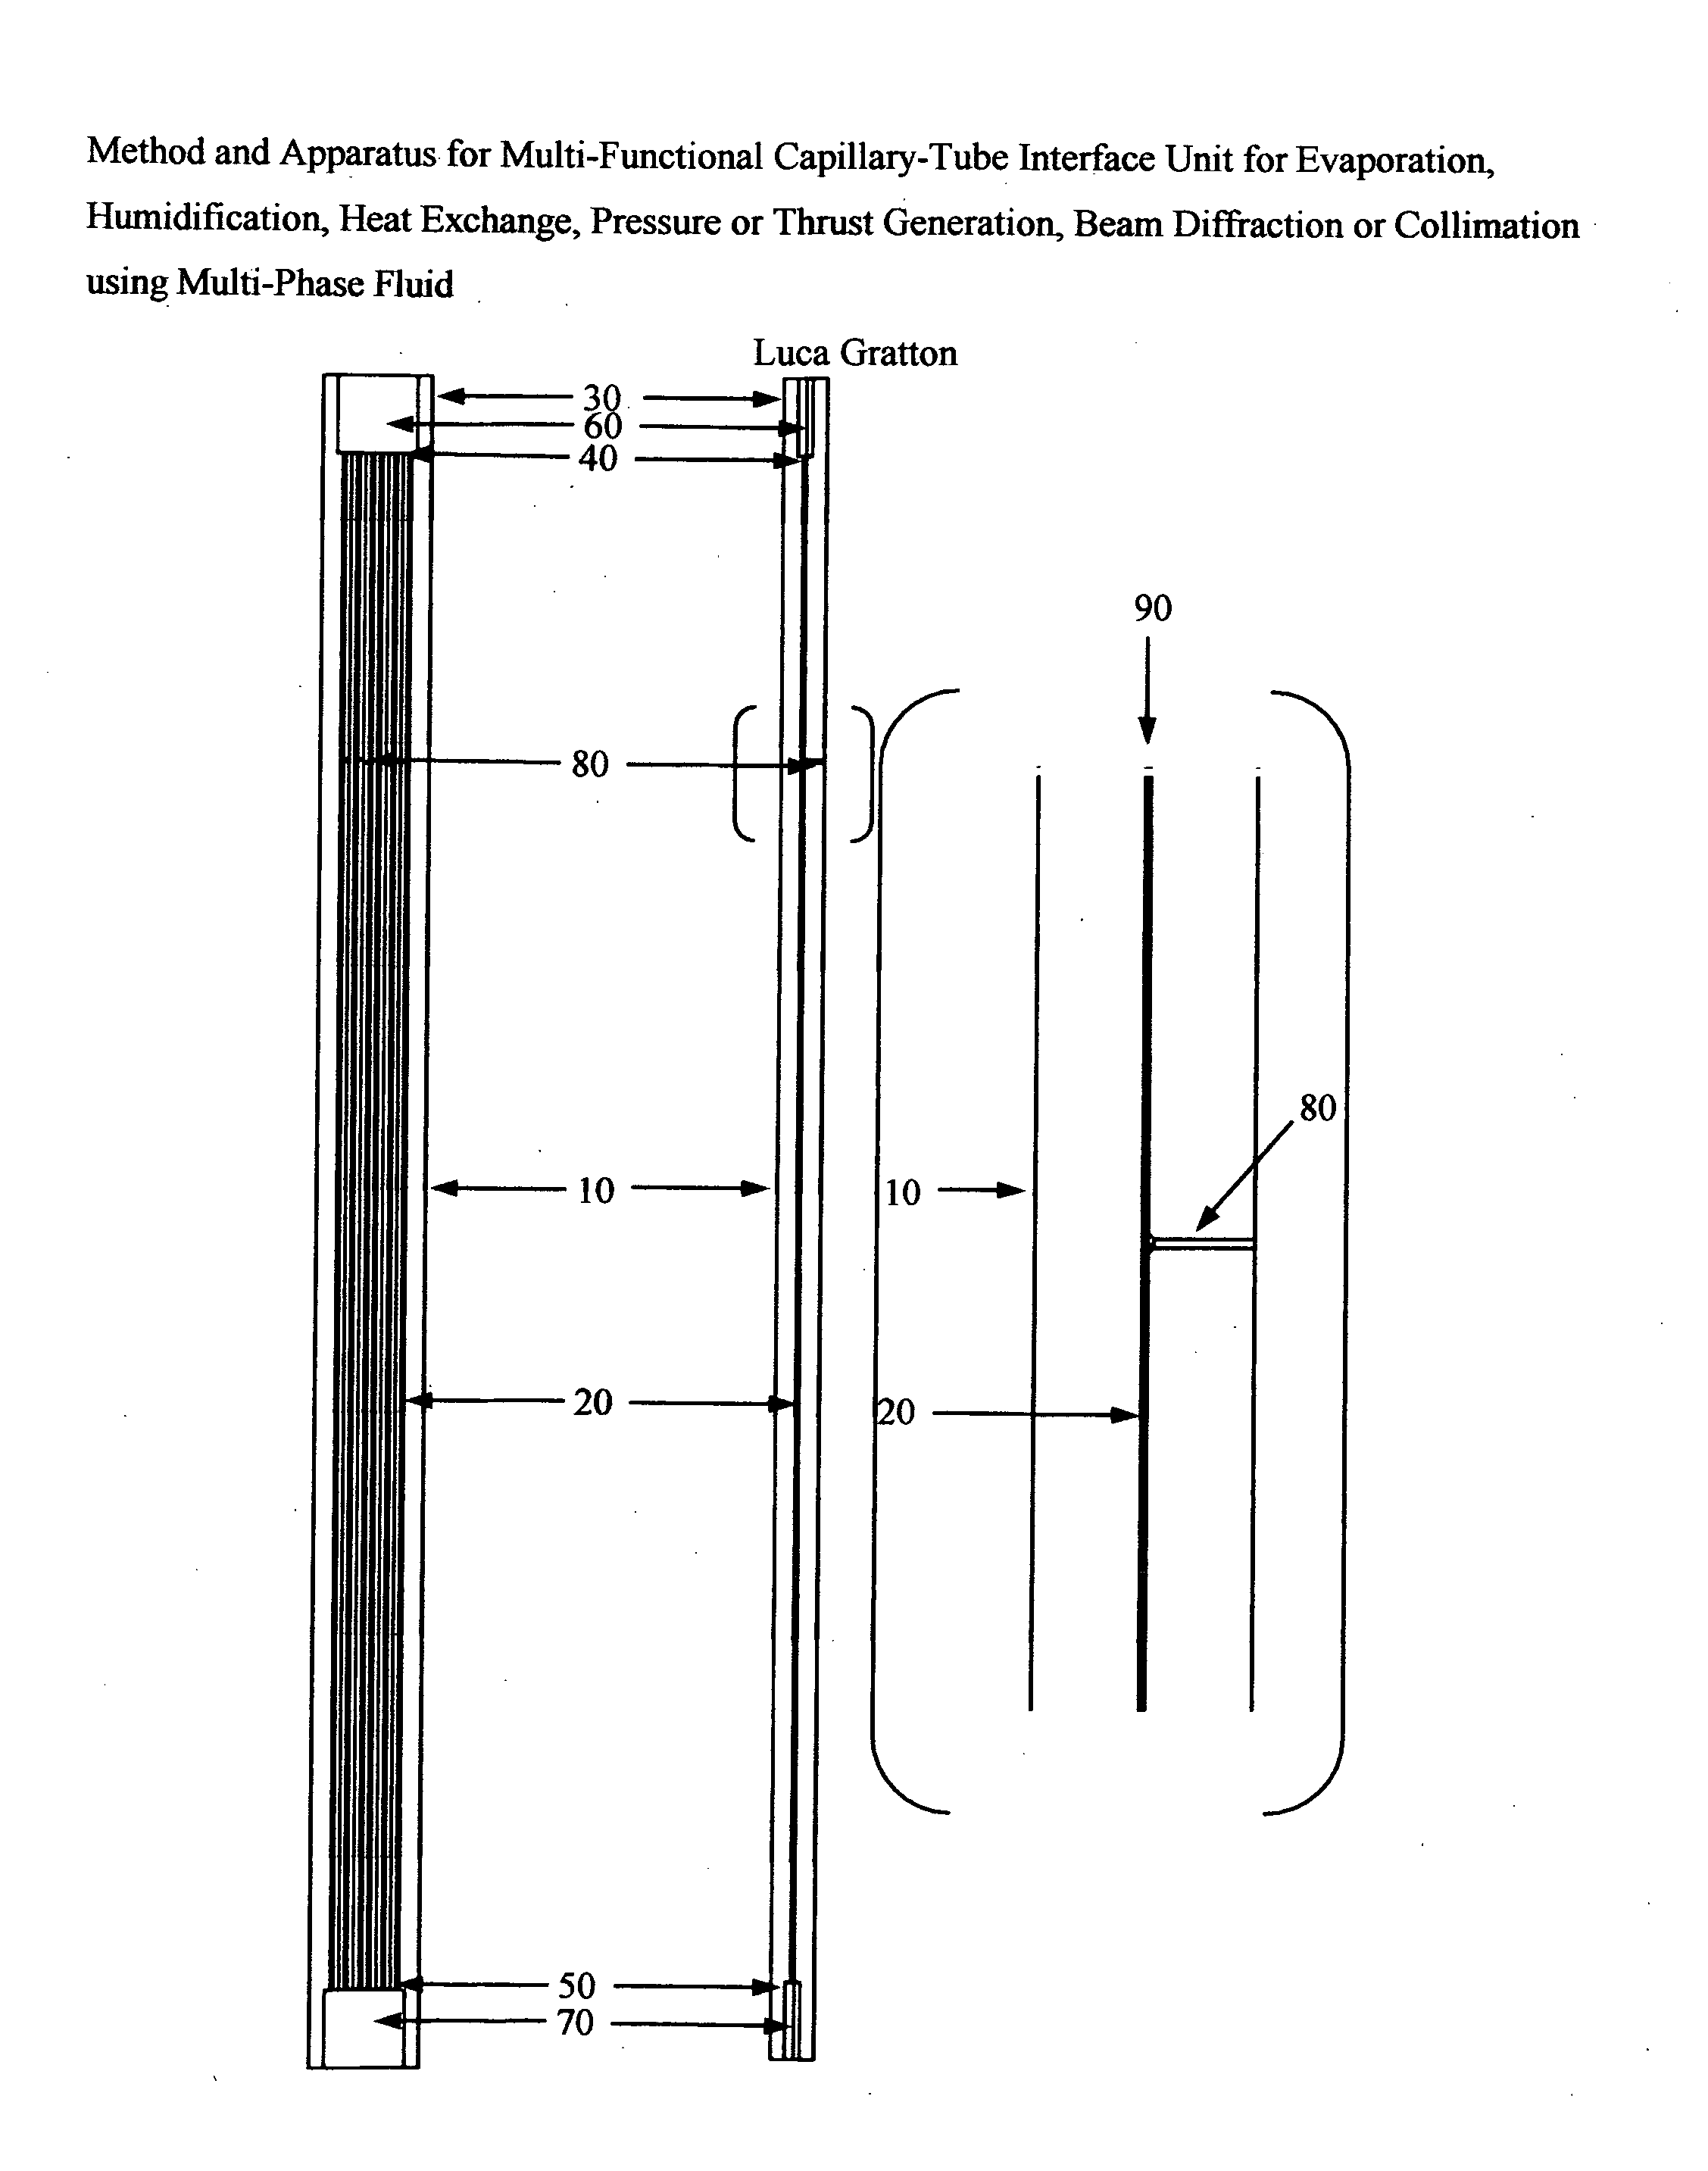 Method and apparatus for multi-functional capillary-tube interface unit for evaporation, humidification, heat exchange, pressure or thrust generation, beam diffraction or collimation using multi-phase fluid